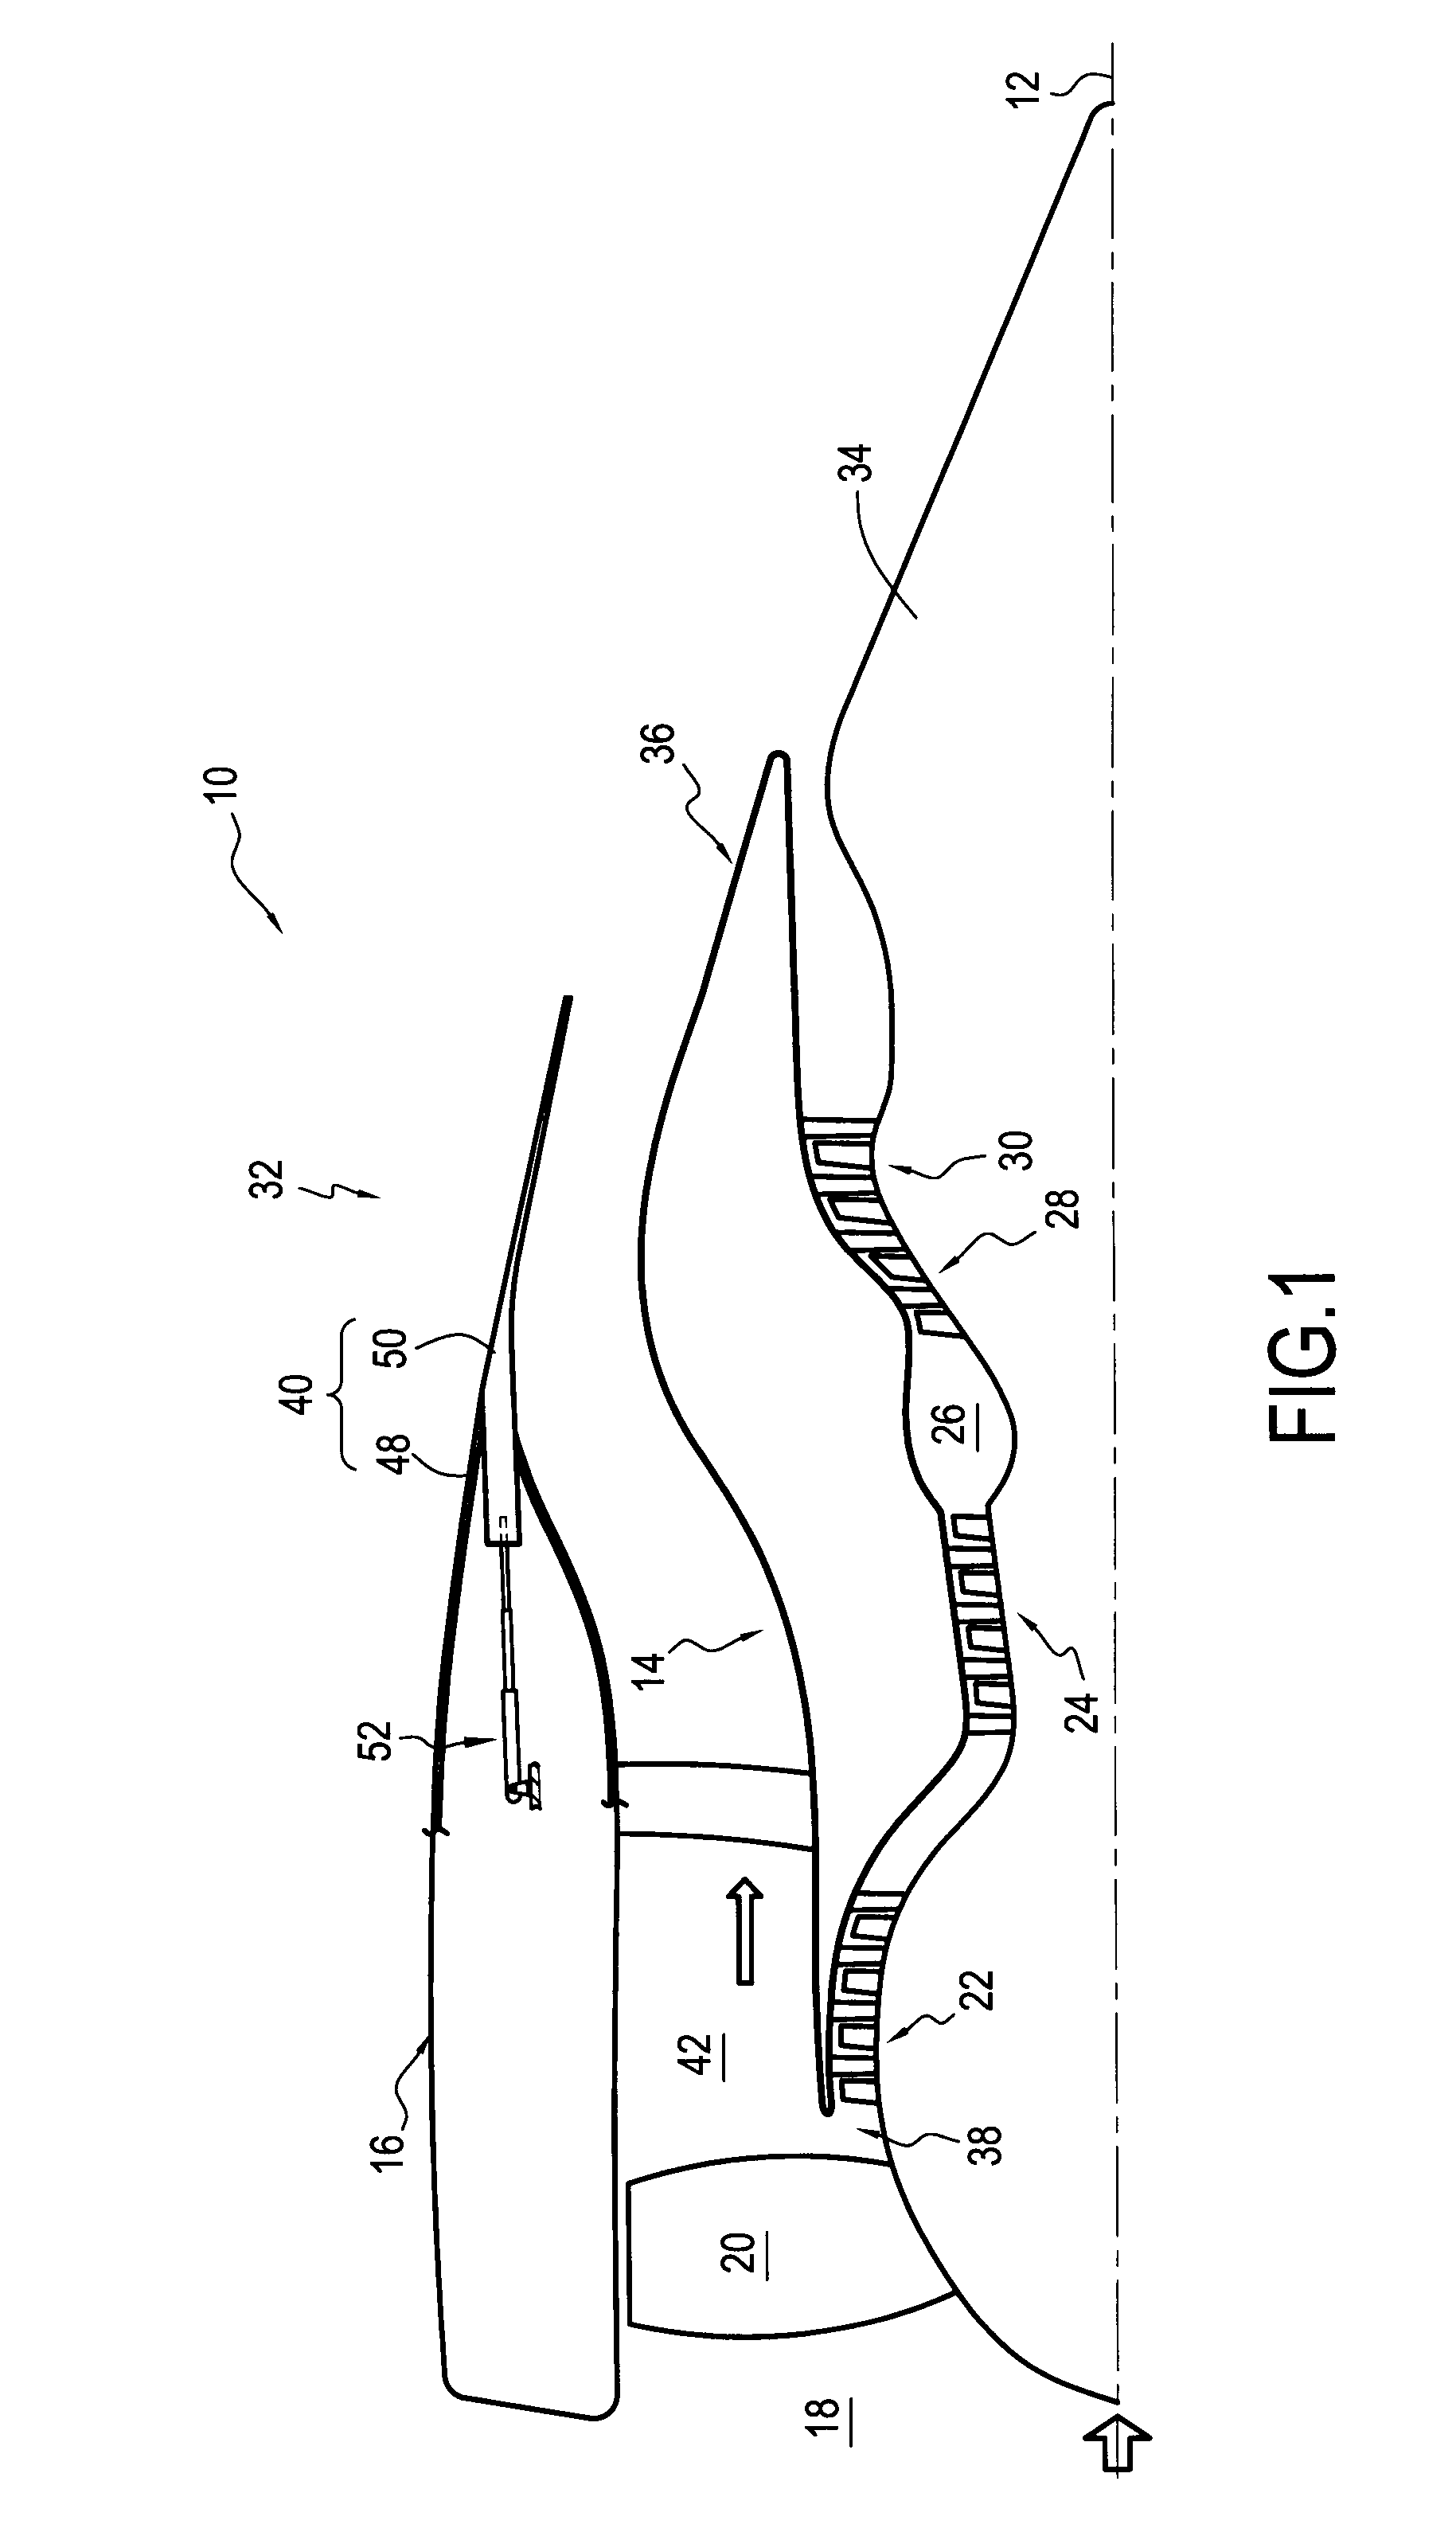 Gas exhaust nozzle for a bypass turbomachine having an exhaust or throat section that can be varied by moving the secondary cowl